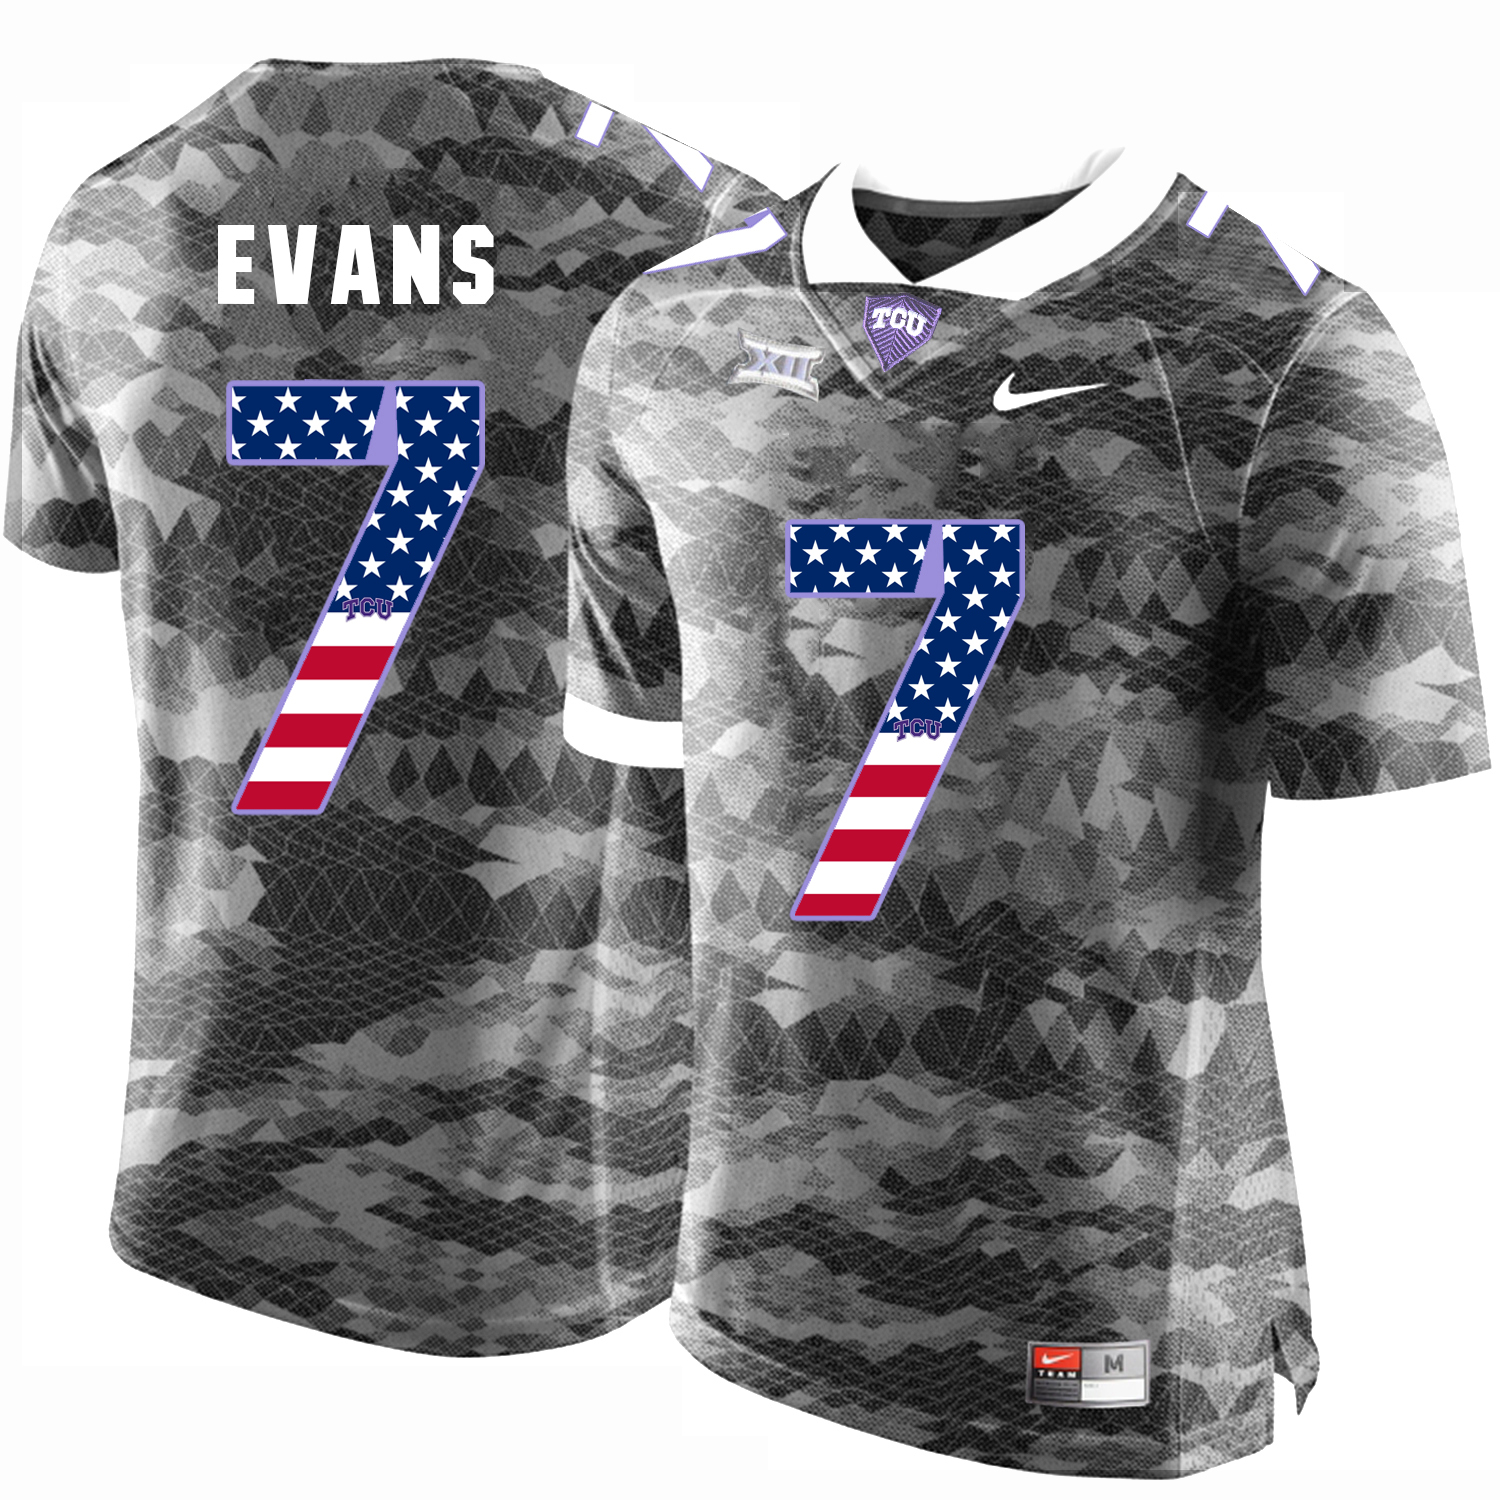 TCU Horned Frogs 7 EVANS Gray USA Flag College Football Jersey